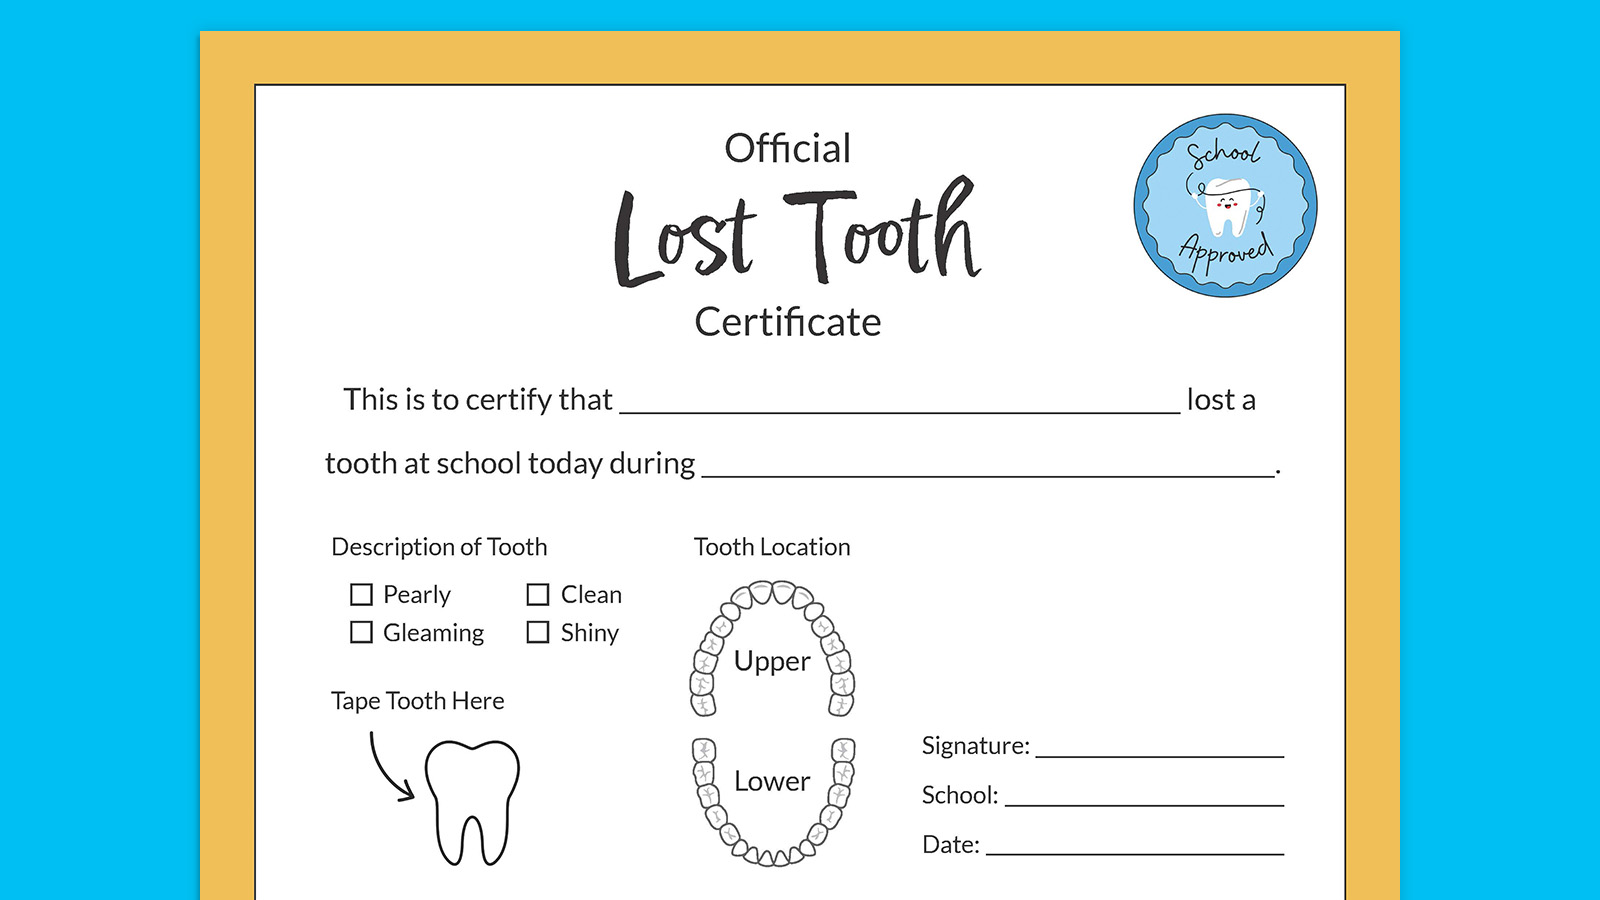 Lost tooth certificate for school to give to student. 